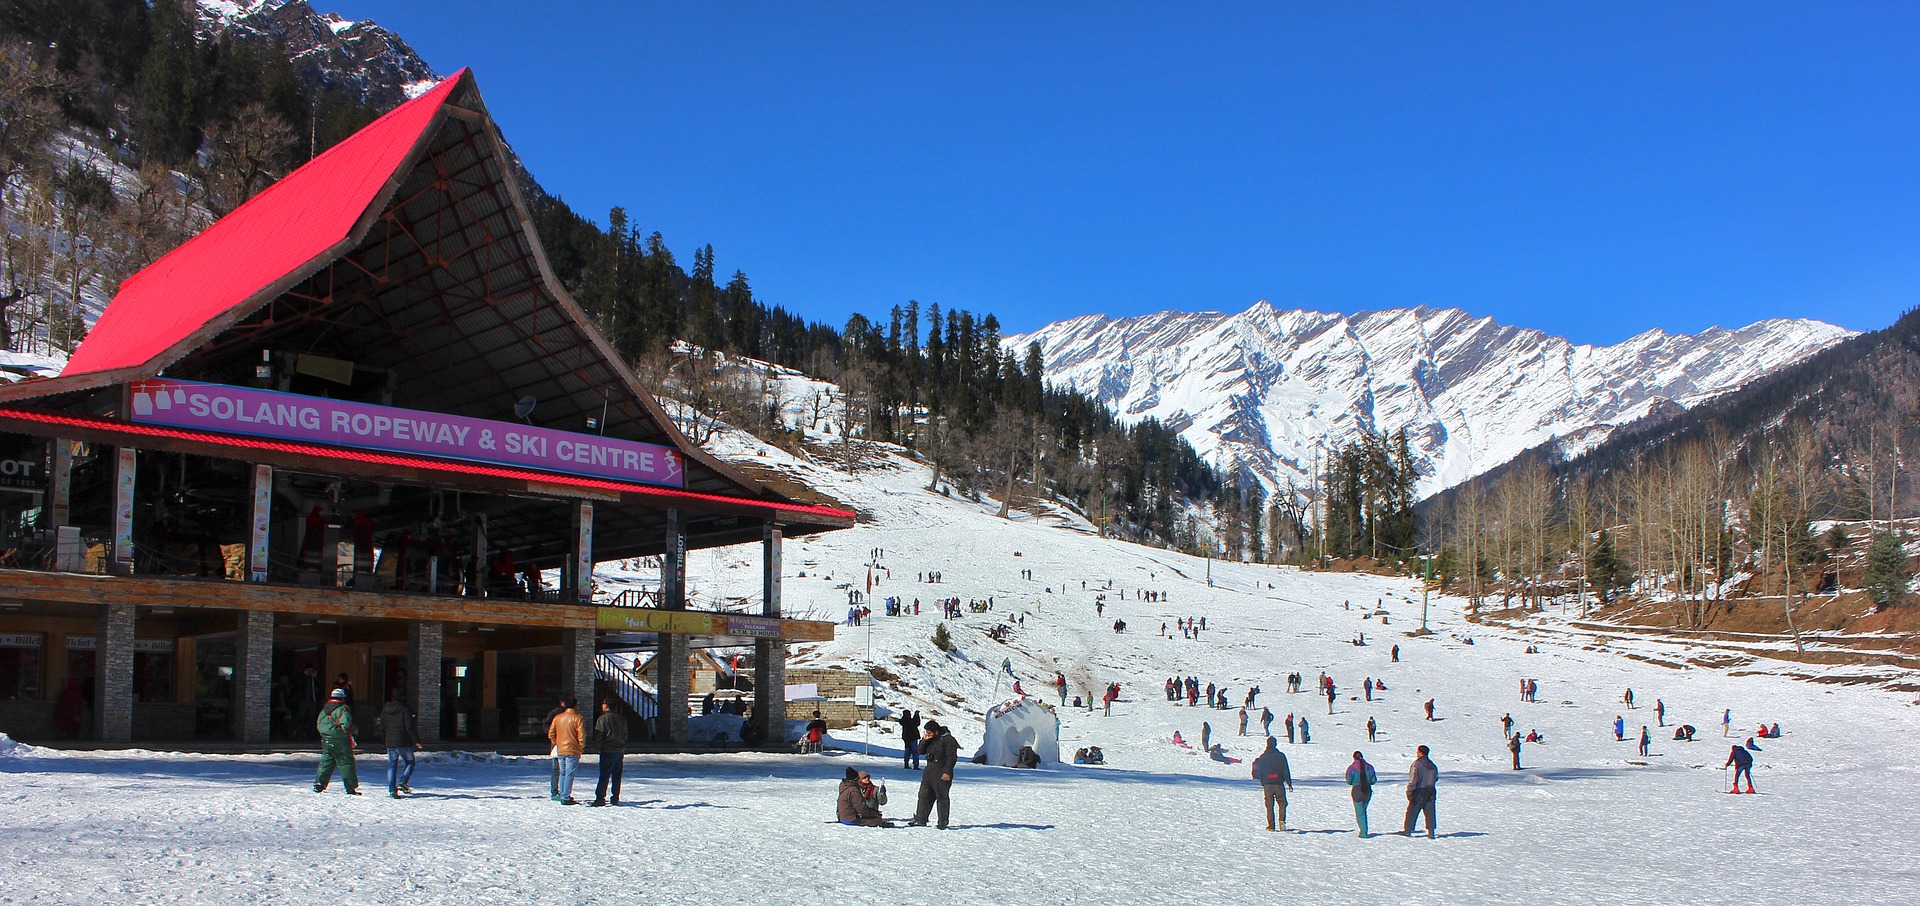 manali rohtang tour package from delhi